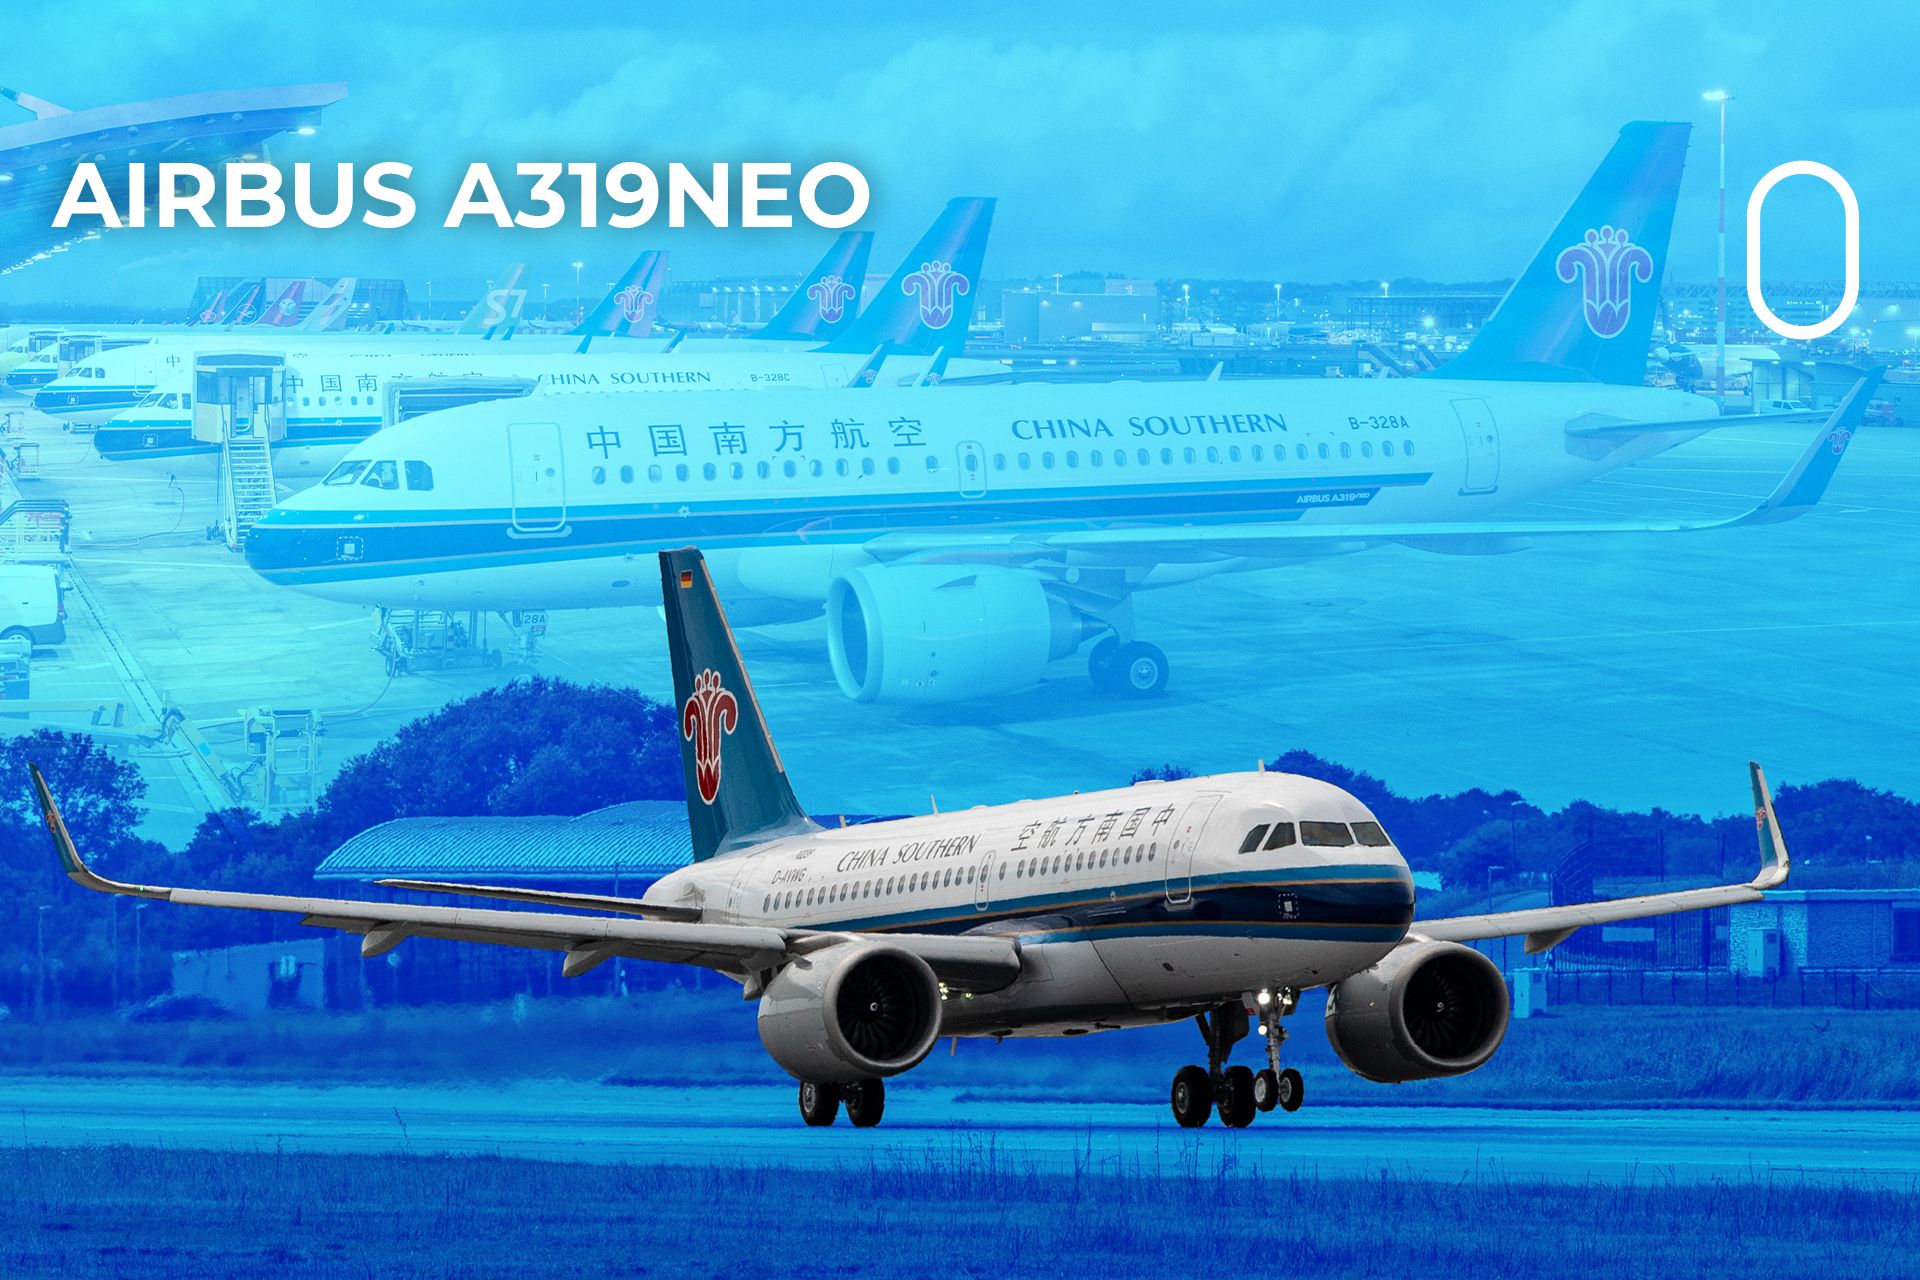 Rare Breed A Look At The World's Few Active Airbus A319neos